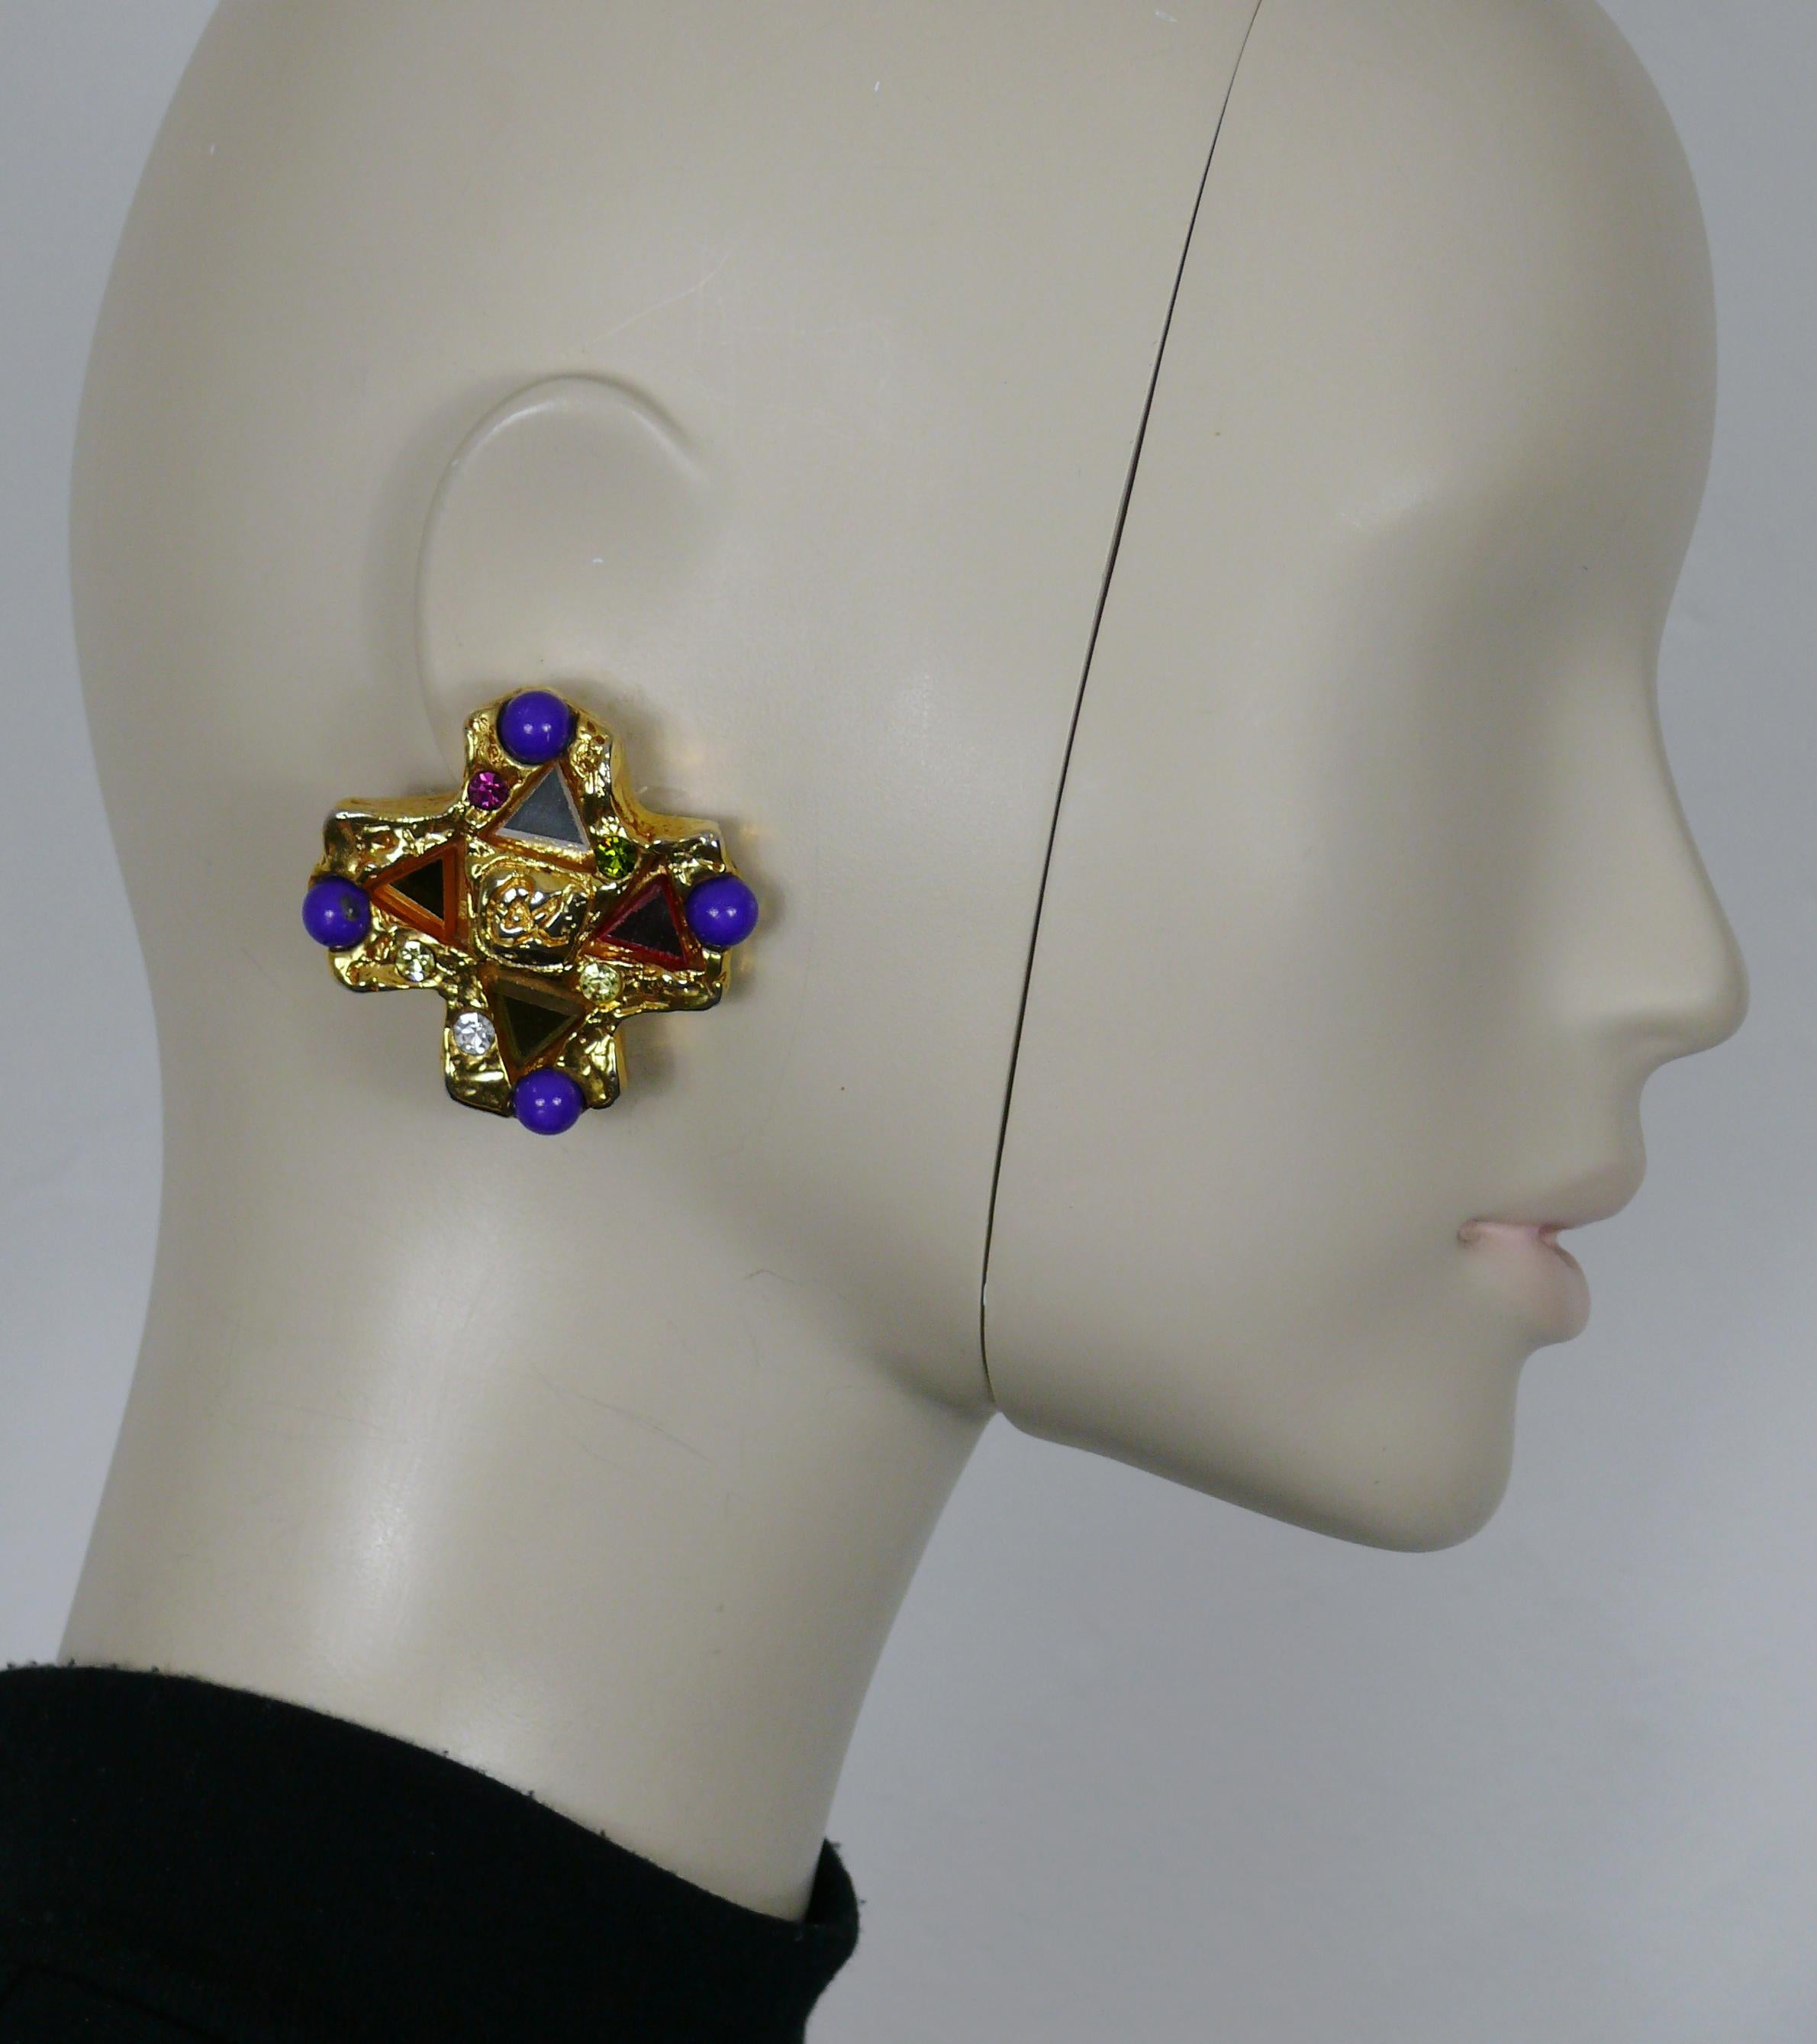 CHRISTIAN LACROIX vintage massive gold tone resin cross clip-on earrings (clip-on) embellished with multicolor mirrors, purple resin beads, multicolor crystals and CL logo at the center.

Marked CHRISTIAN LACROIX CL Made in France.

Indicative